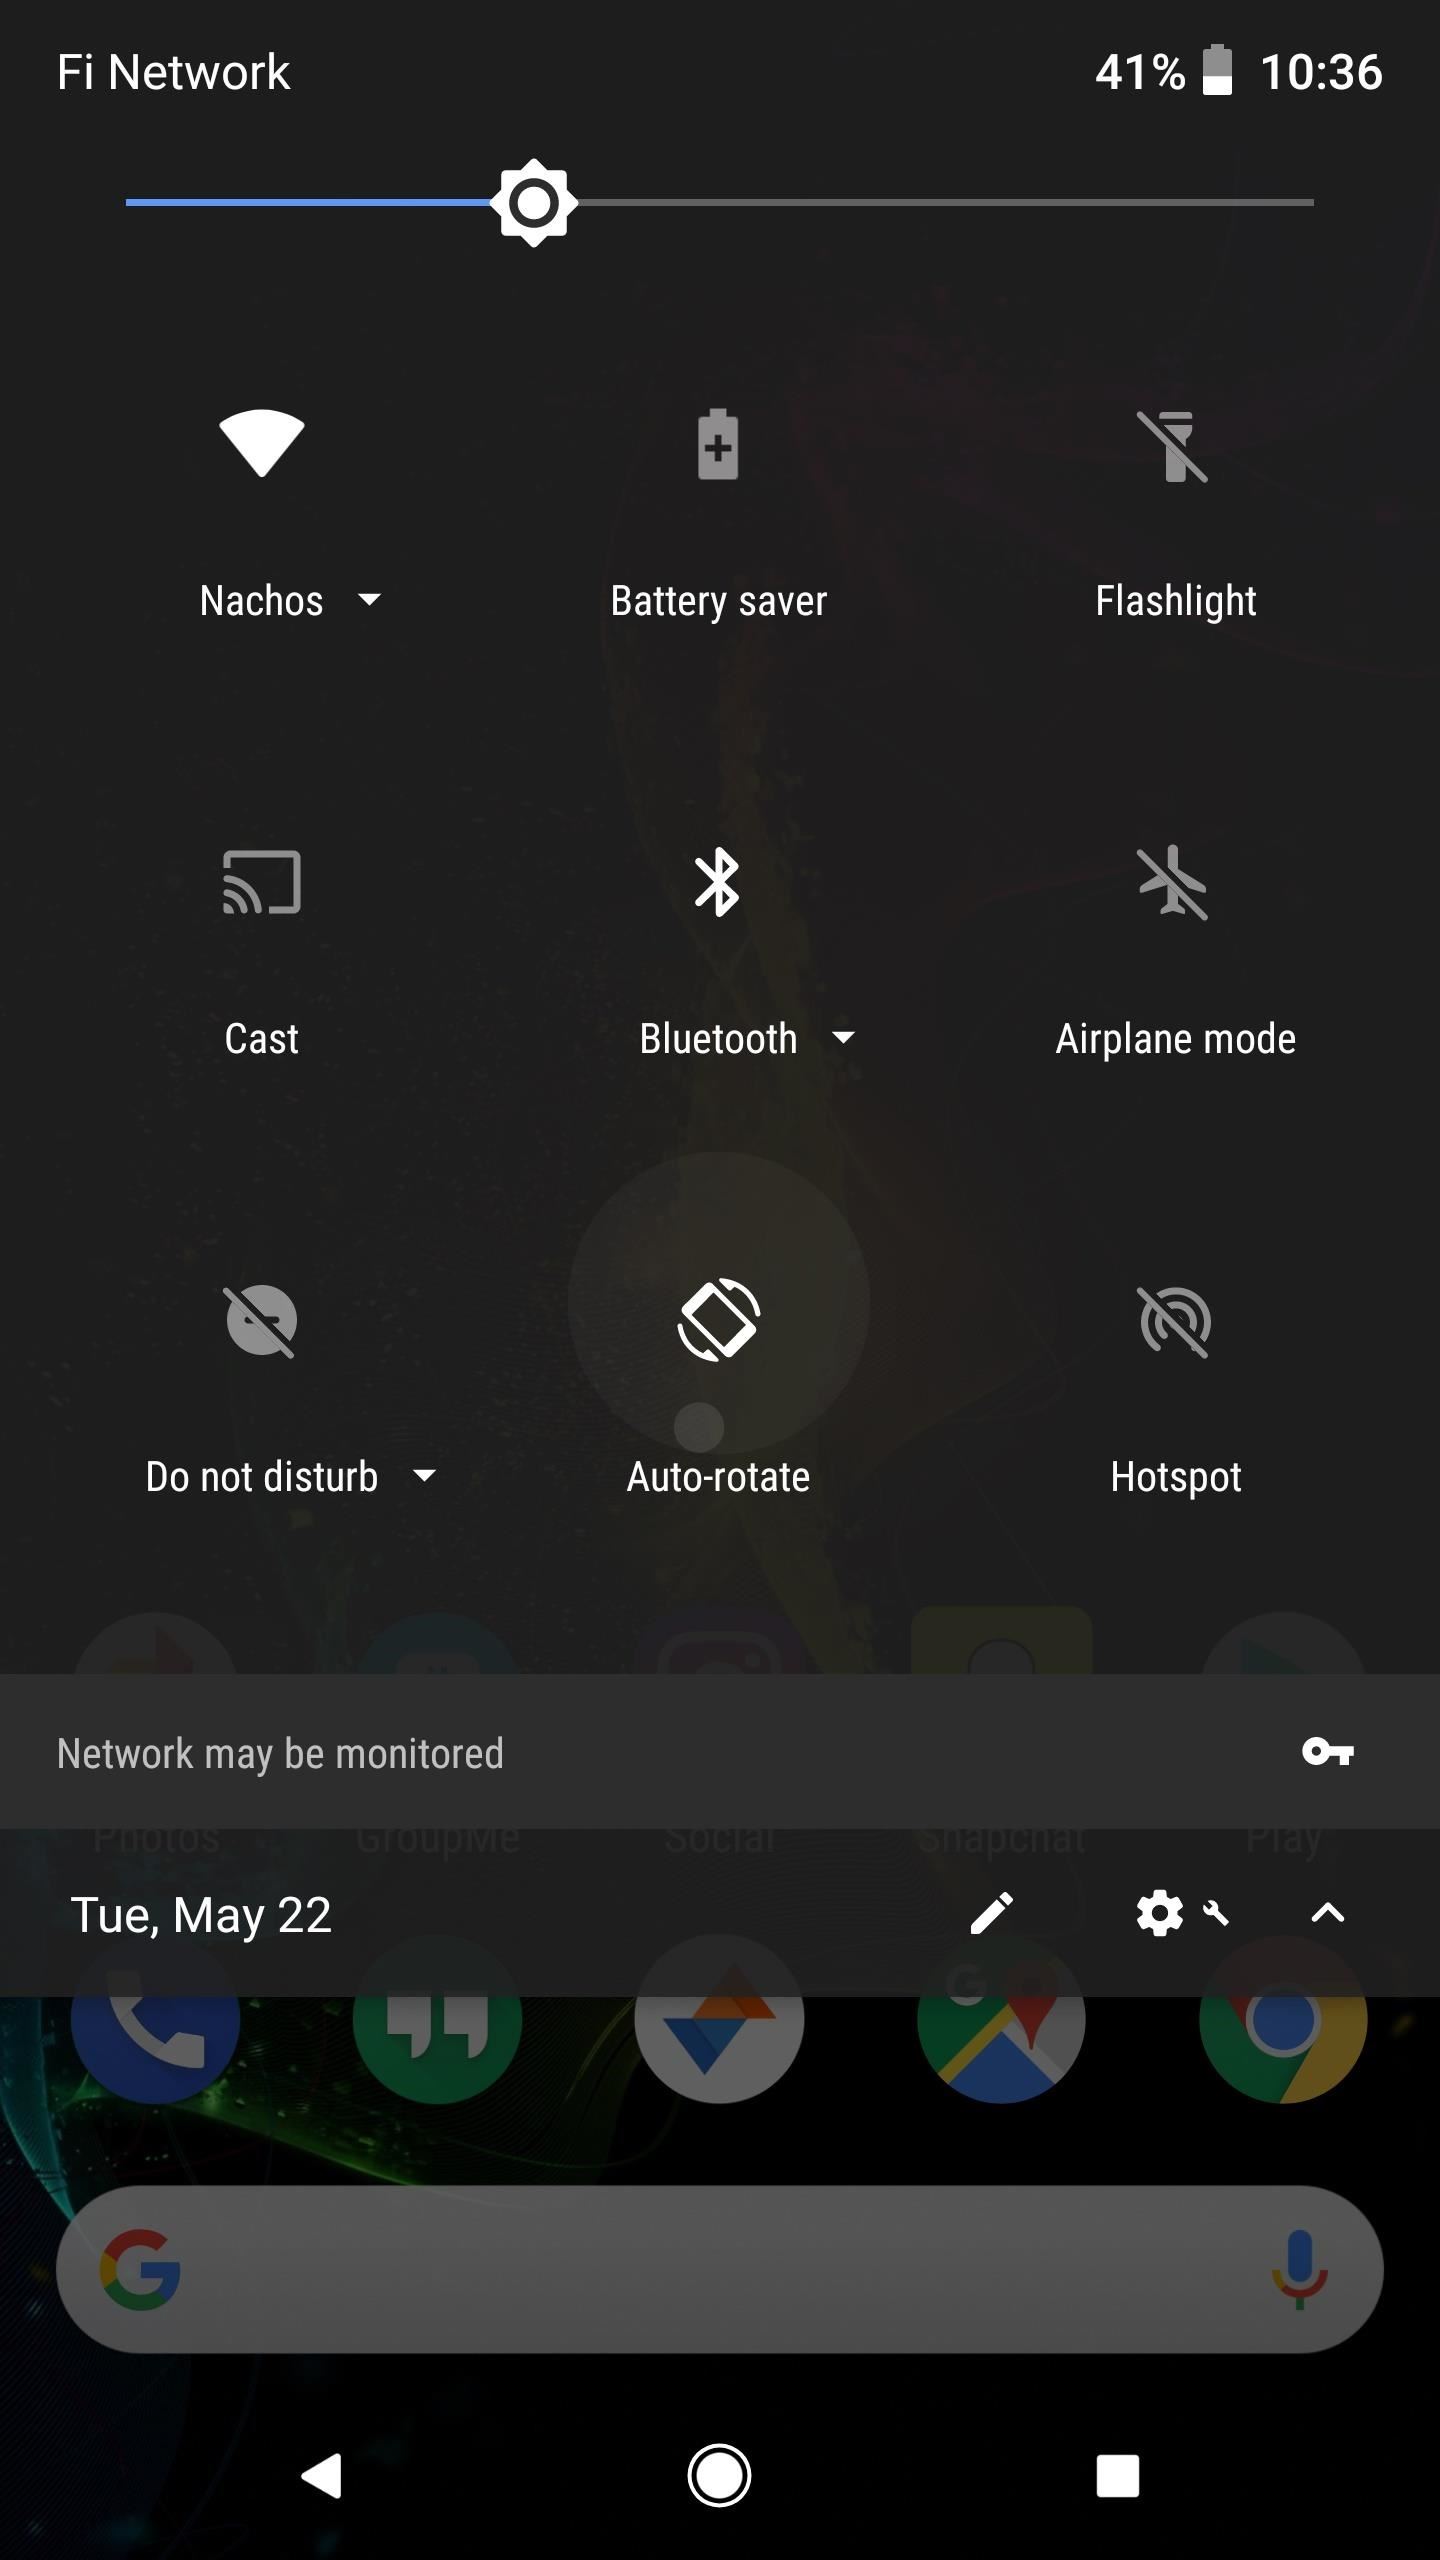 This App Gives You Android 9.0 Pie's Auto-Rotate Button on Older Versions